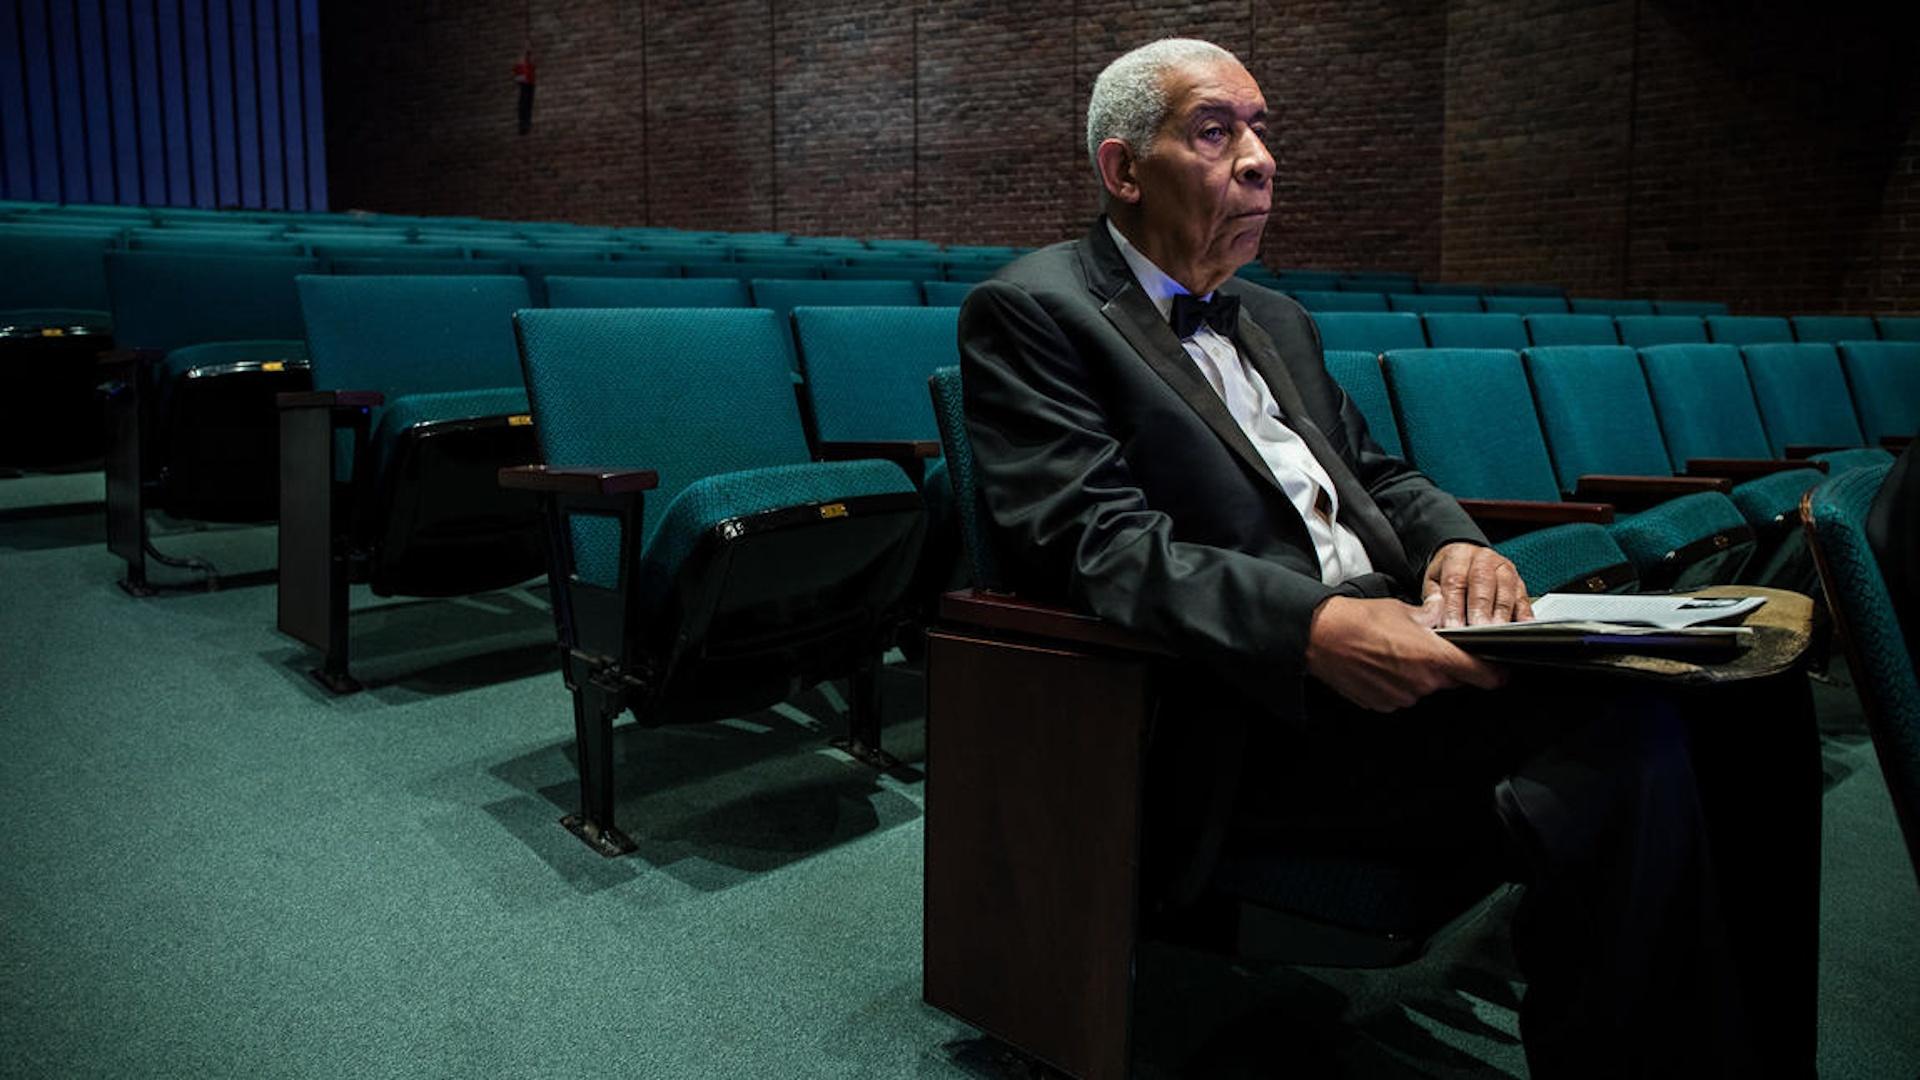 Norman Malone sitting in an empty auditorium, waiting.